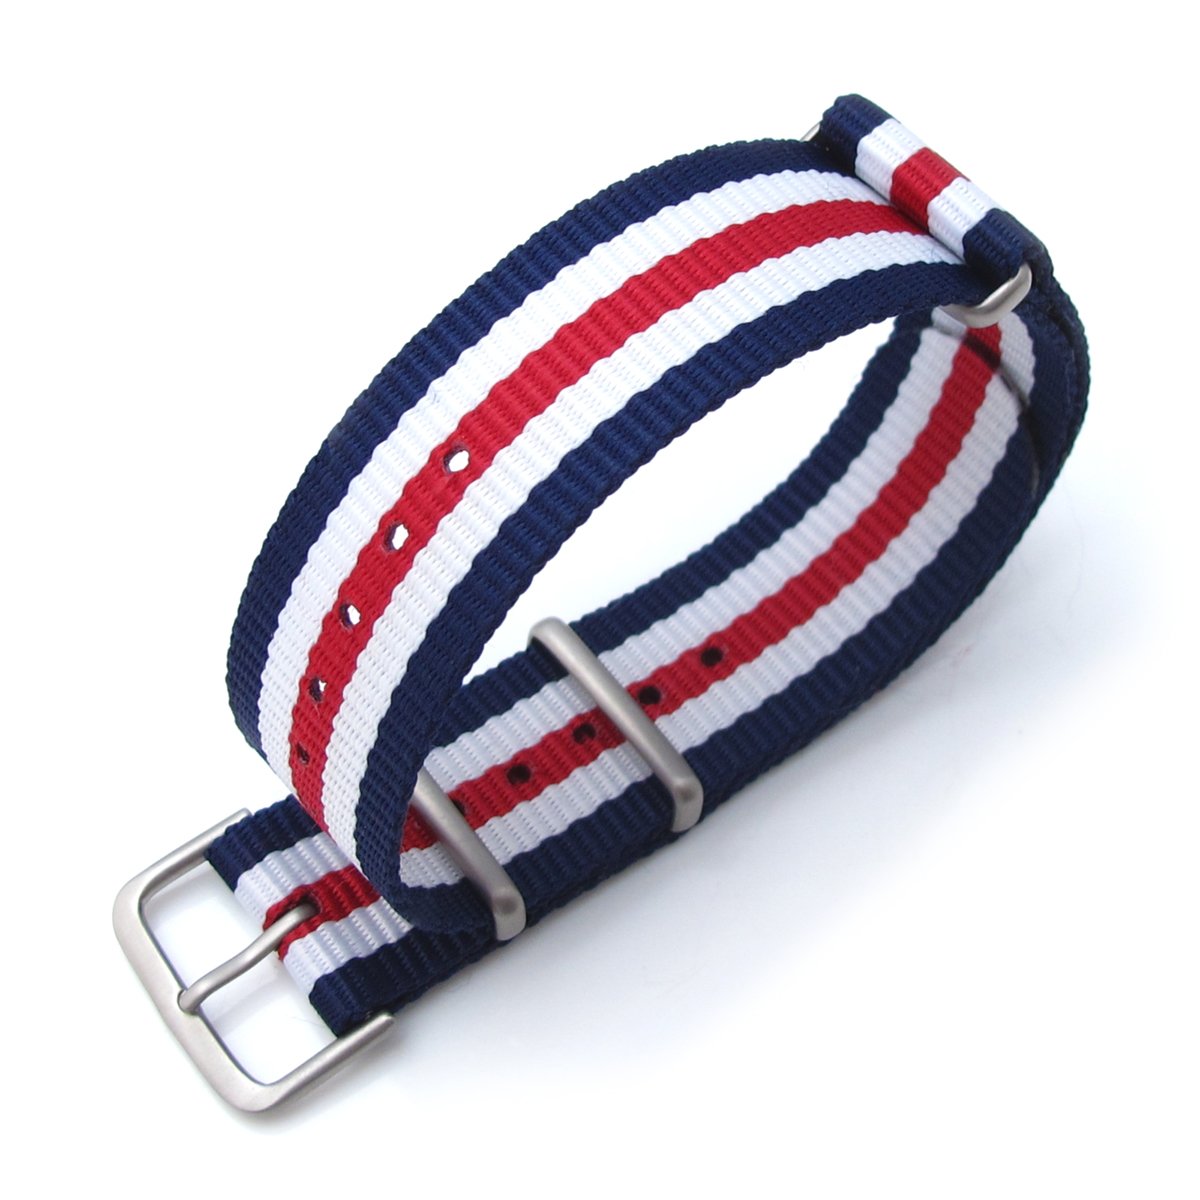 MiLTAT 18mm or 22mm G10 military watch strap ballistic nylon armband Sandblasted Navy White &amp; Red Strapcode Watch Bands